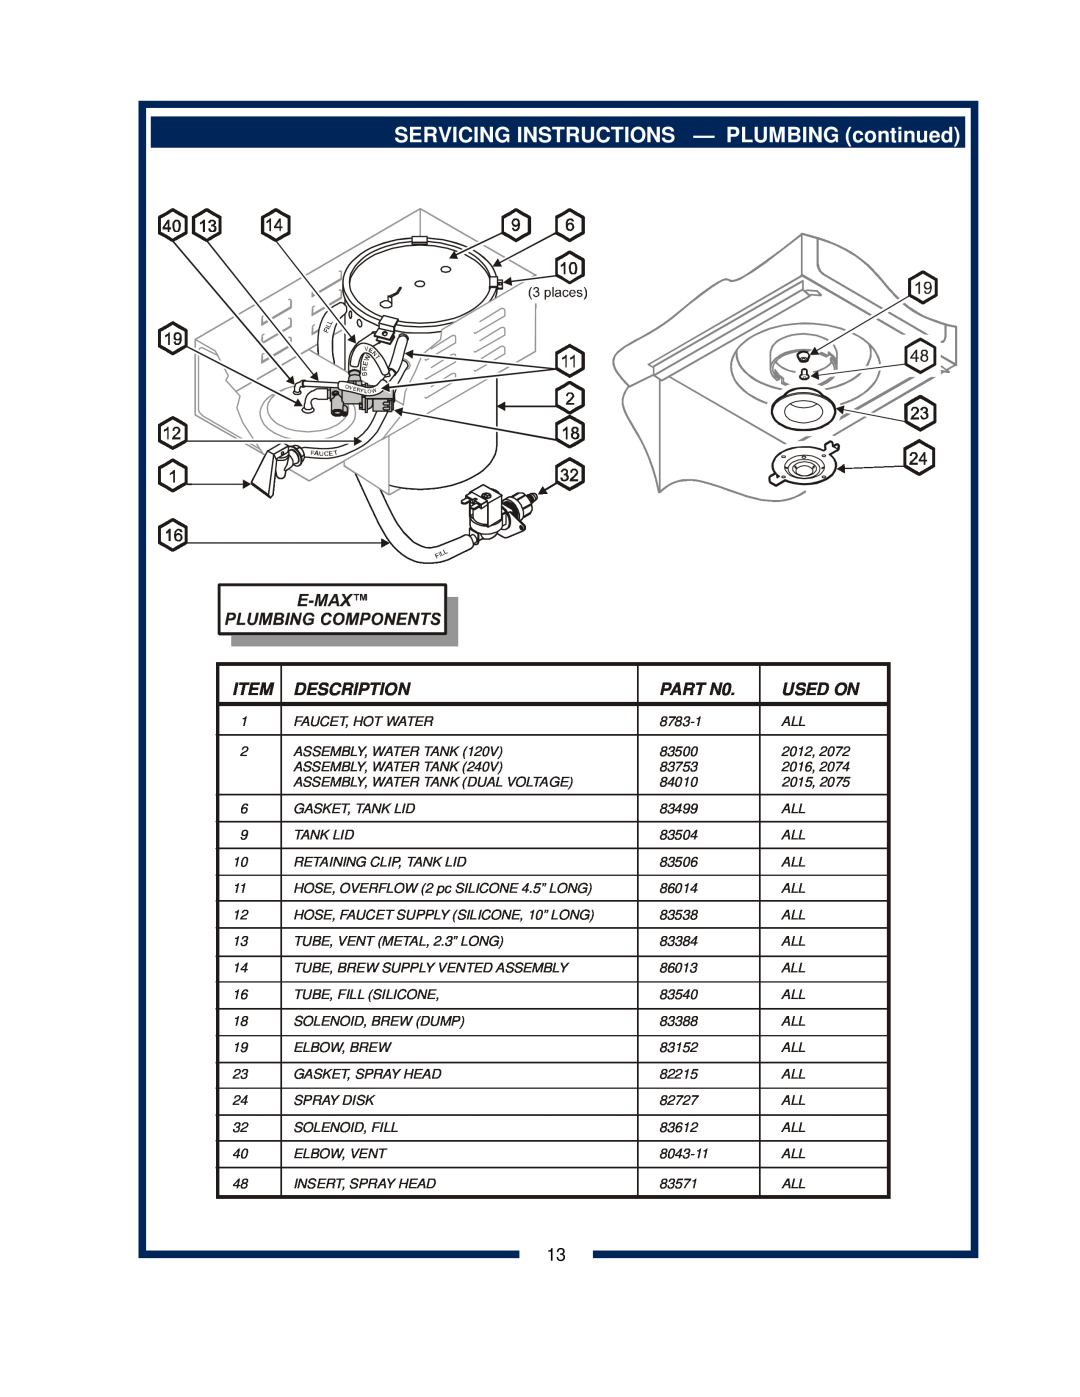 Bloomfield 2086EX, 2088EX, 2080, 2082 owner manual SERVICING INSTRUCTIONS - PLUMBING continued, Description, PART N0, Used On 